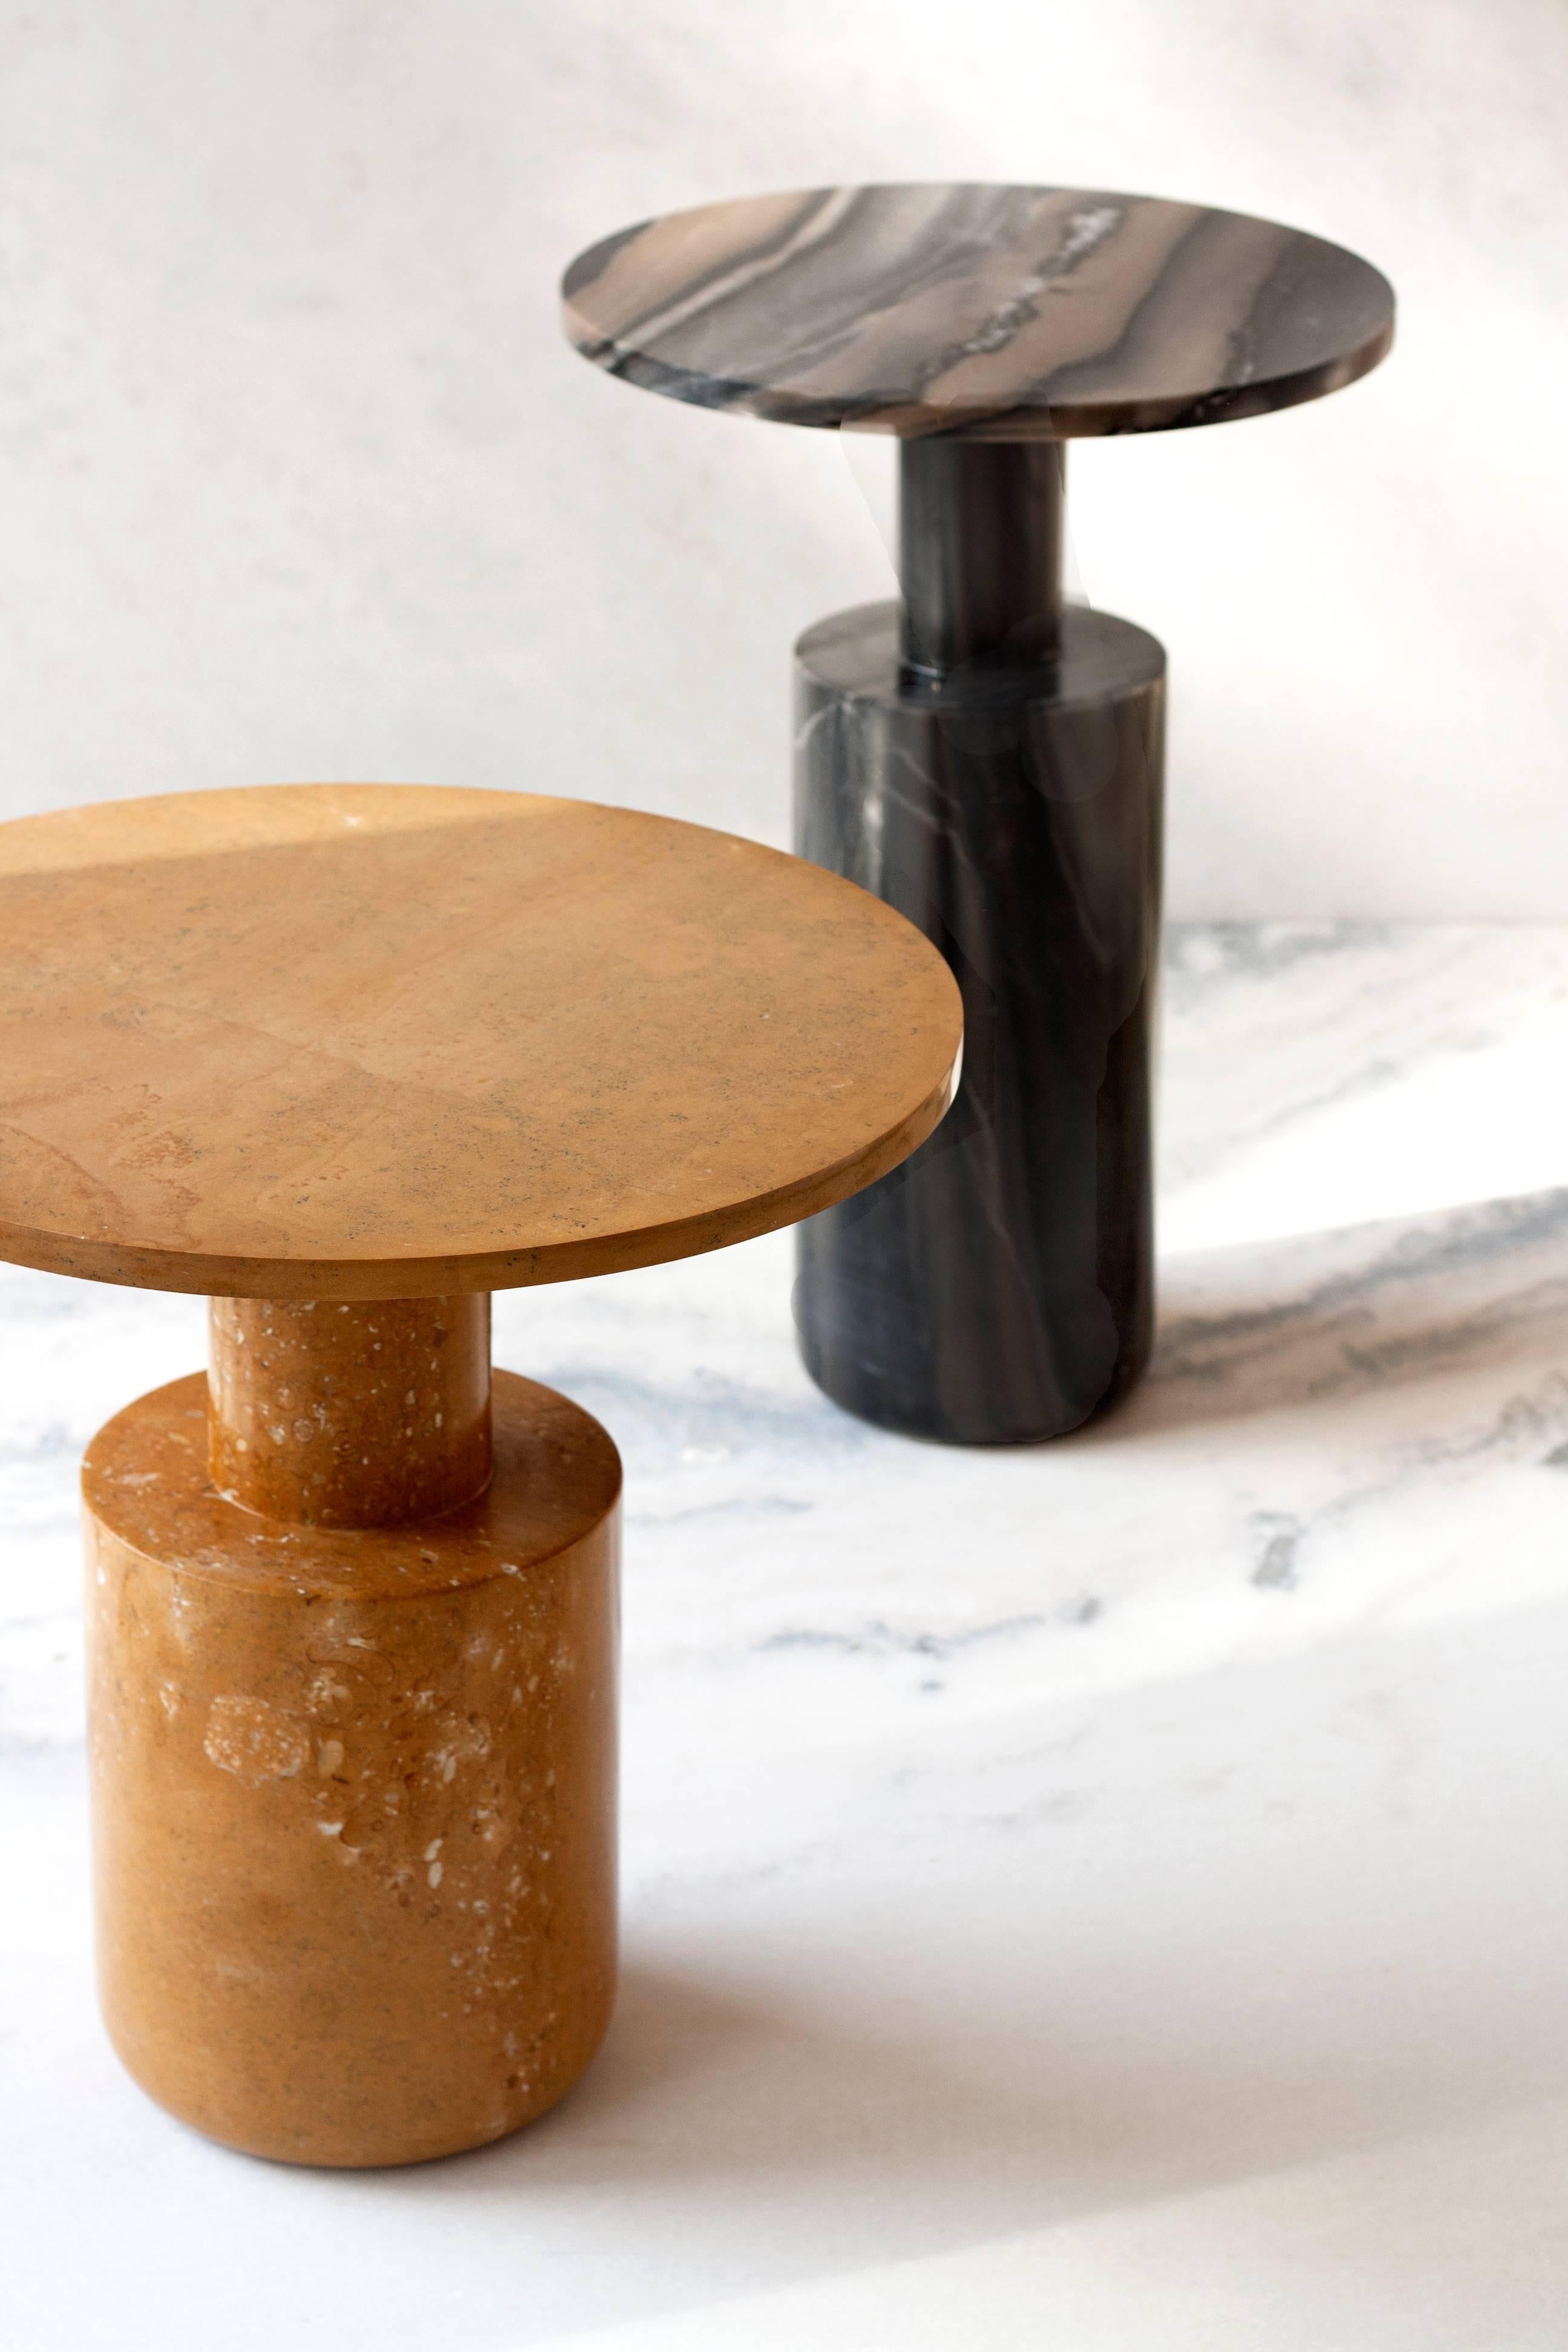 Sienna plateau cocktail table by Raw Material

Materials: Dune yellow marble

Limited edition of 12.